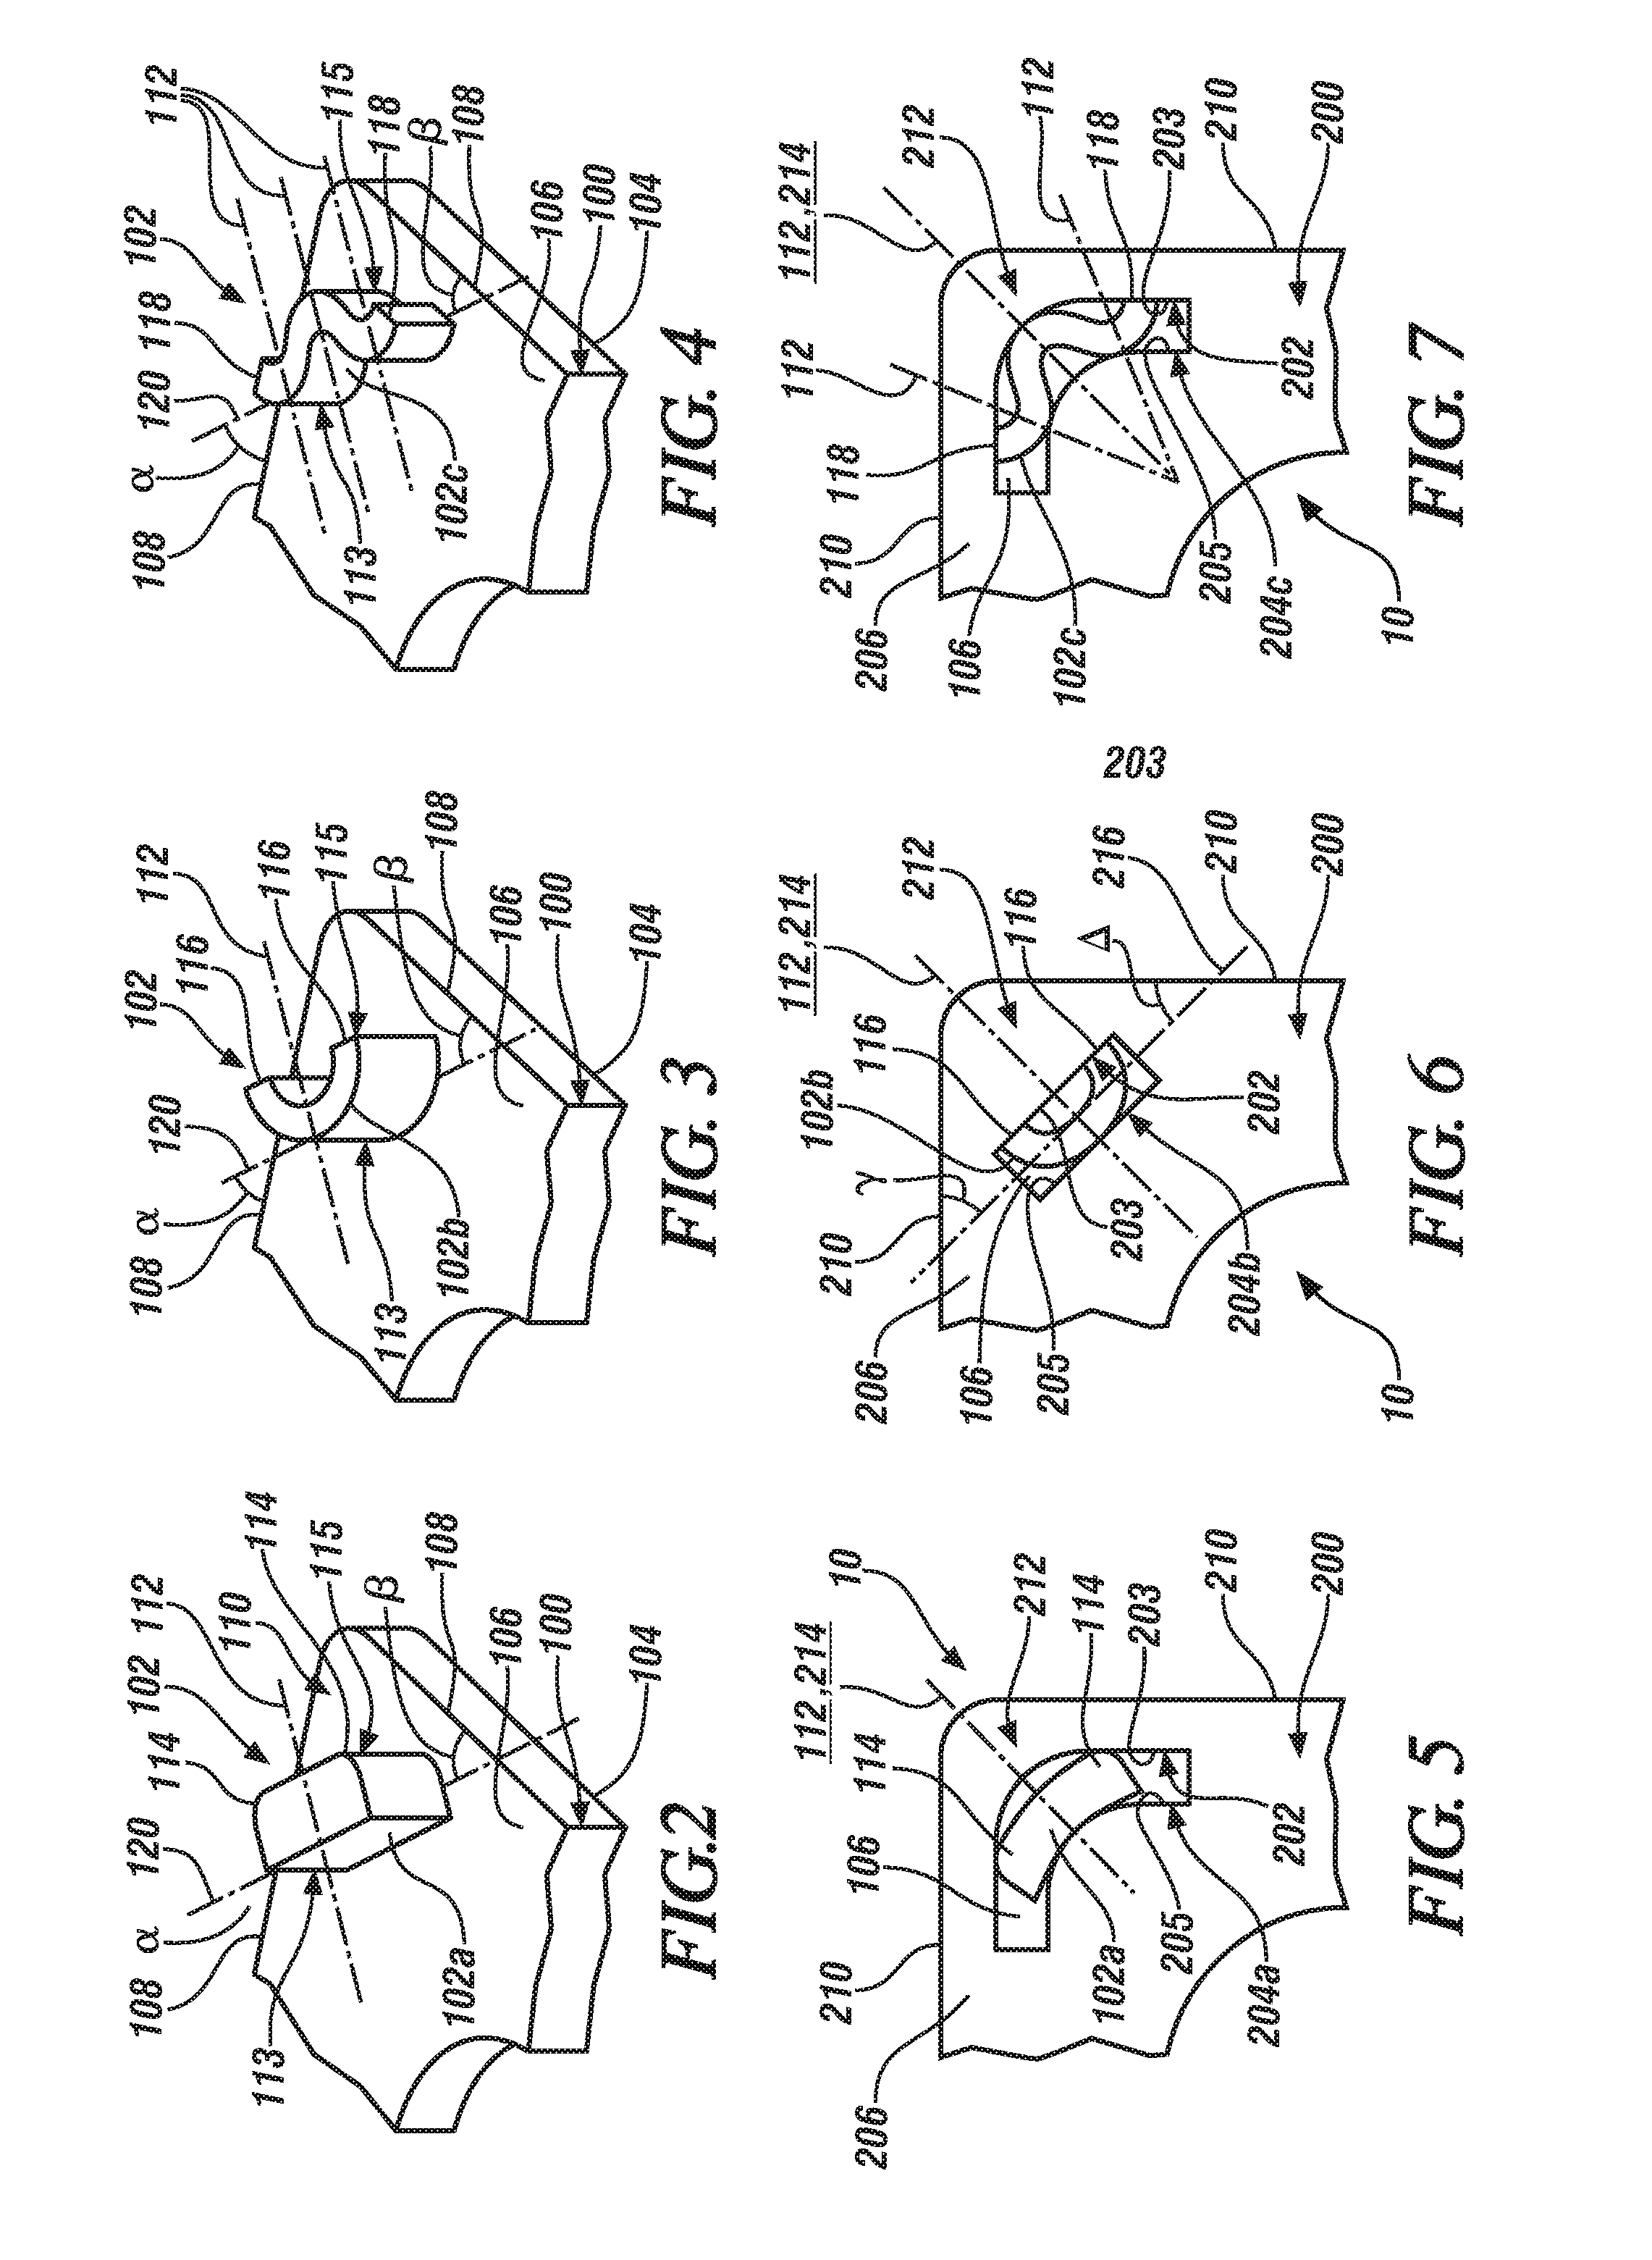 Elastically averaged alignment systems and methods